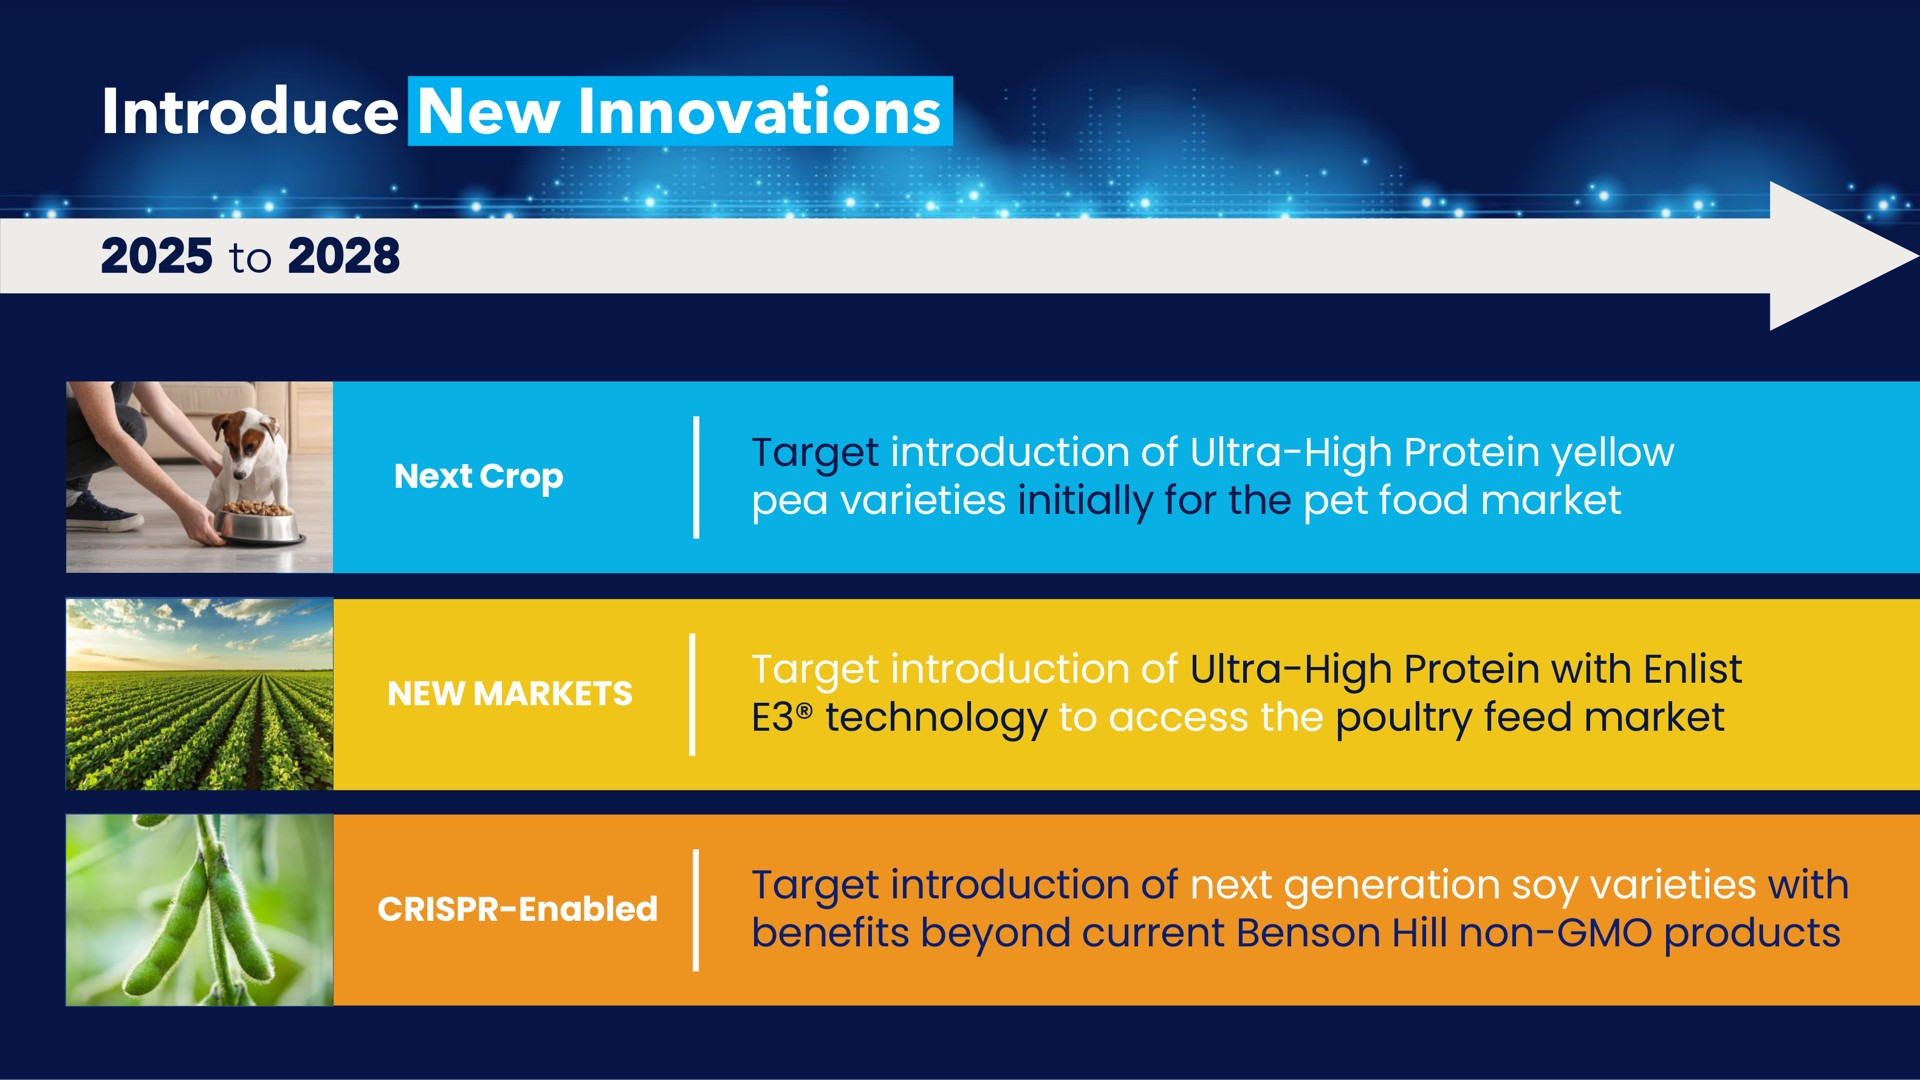 introduce new innovations to next crop target introduction of ultra high protein yellow pea varieties initially for the pet food market new markets target introduction of ultra high protein with enlist technology to access the poultry feed market enabled target introduction of next generation soy varieties with benefits beyond current hill non products | Benson Hill